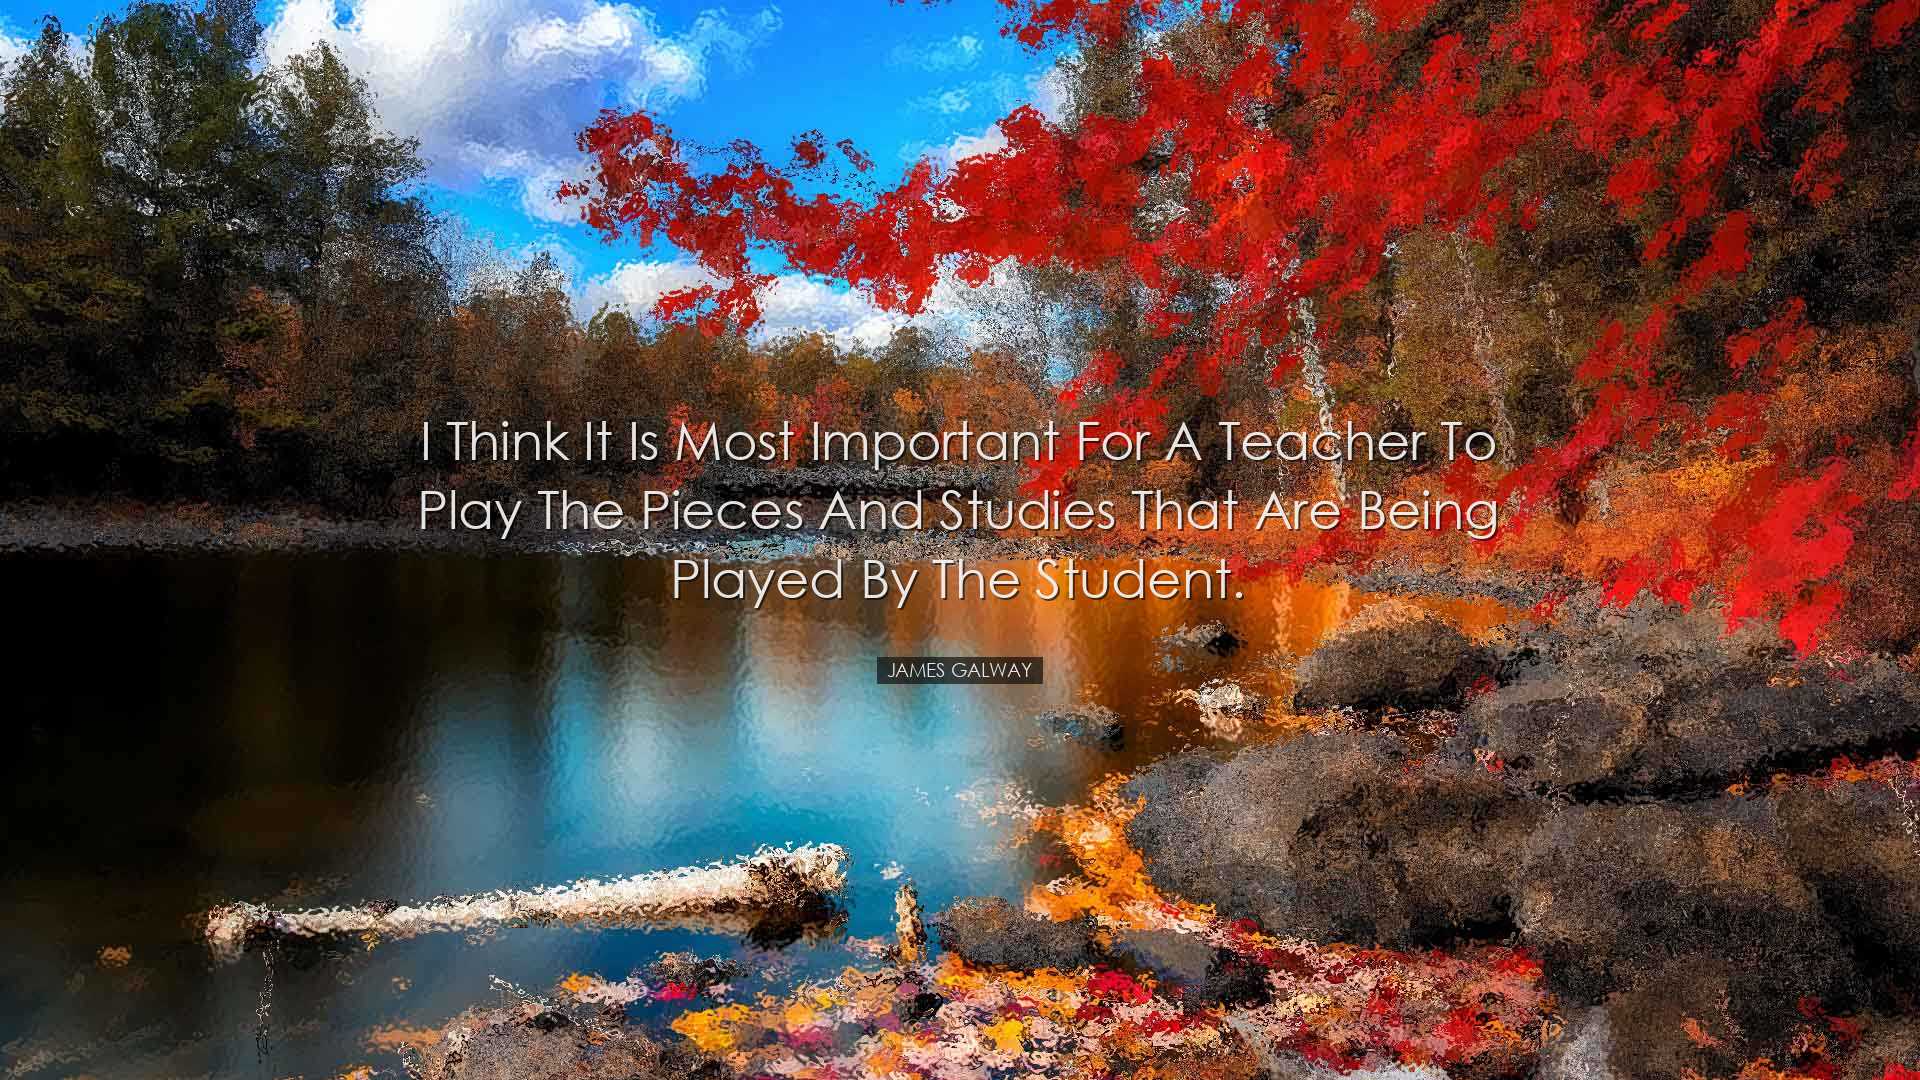 I think it is most important for a teacher to play the pieces and